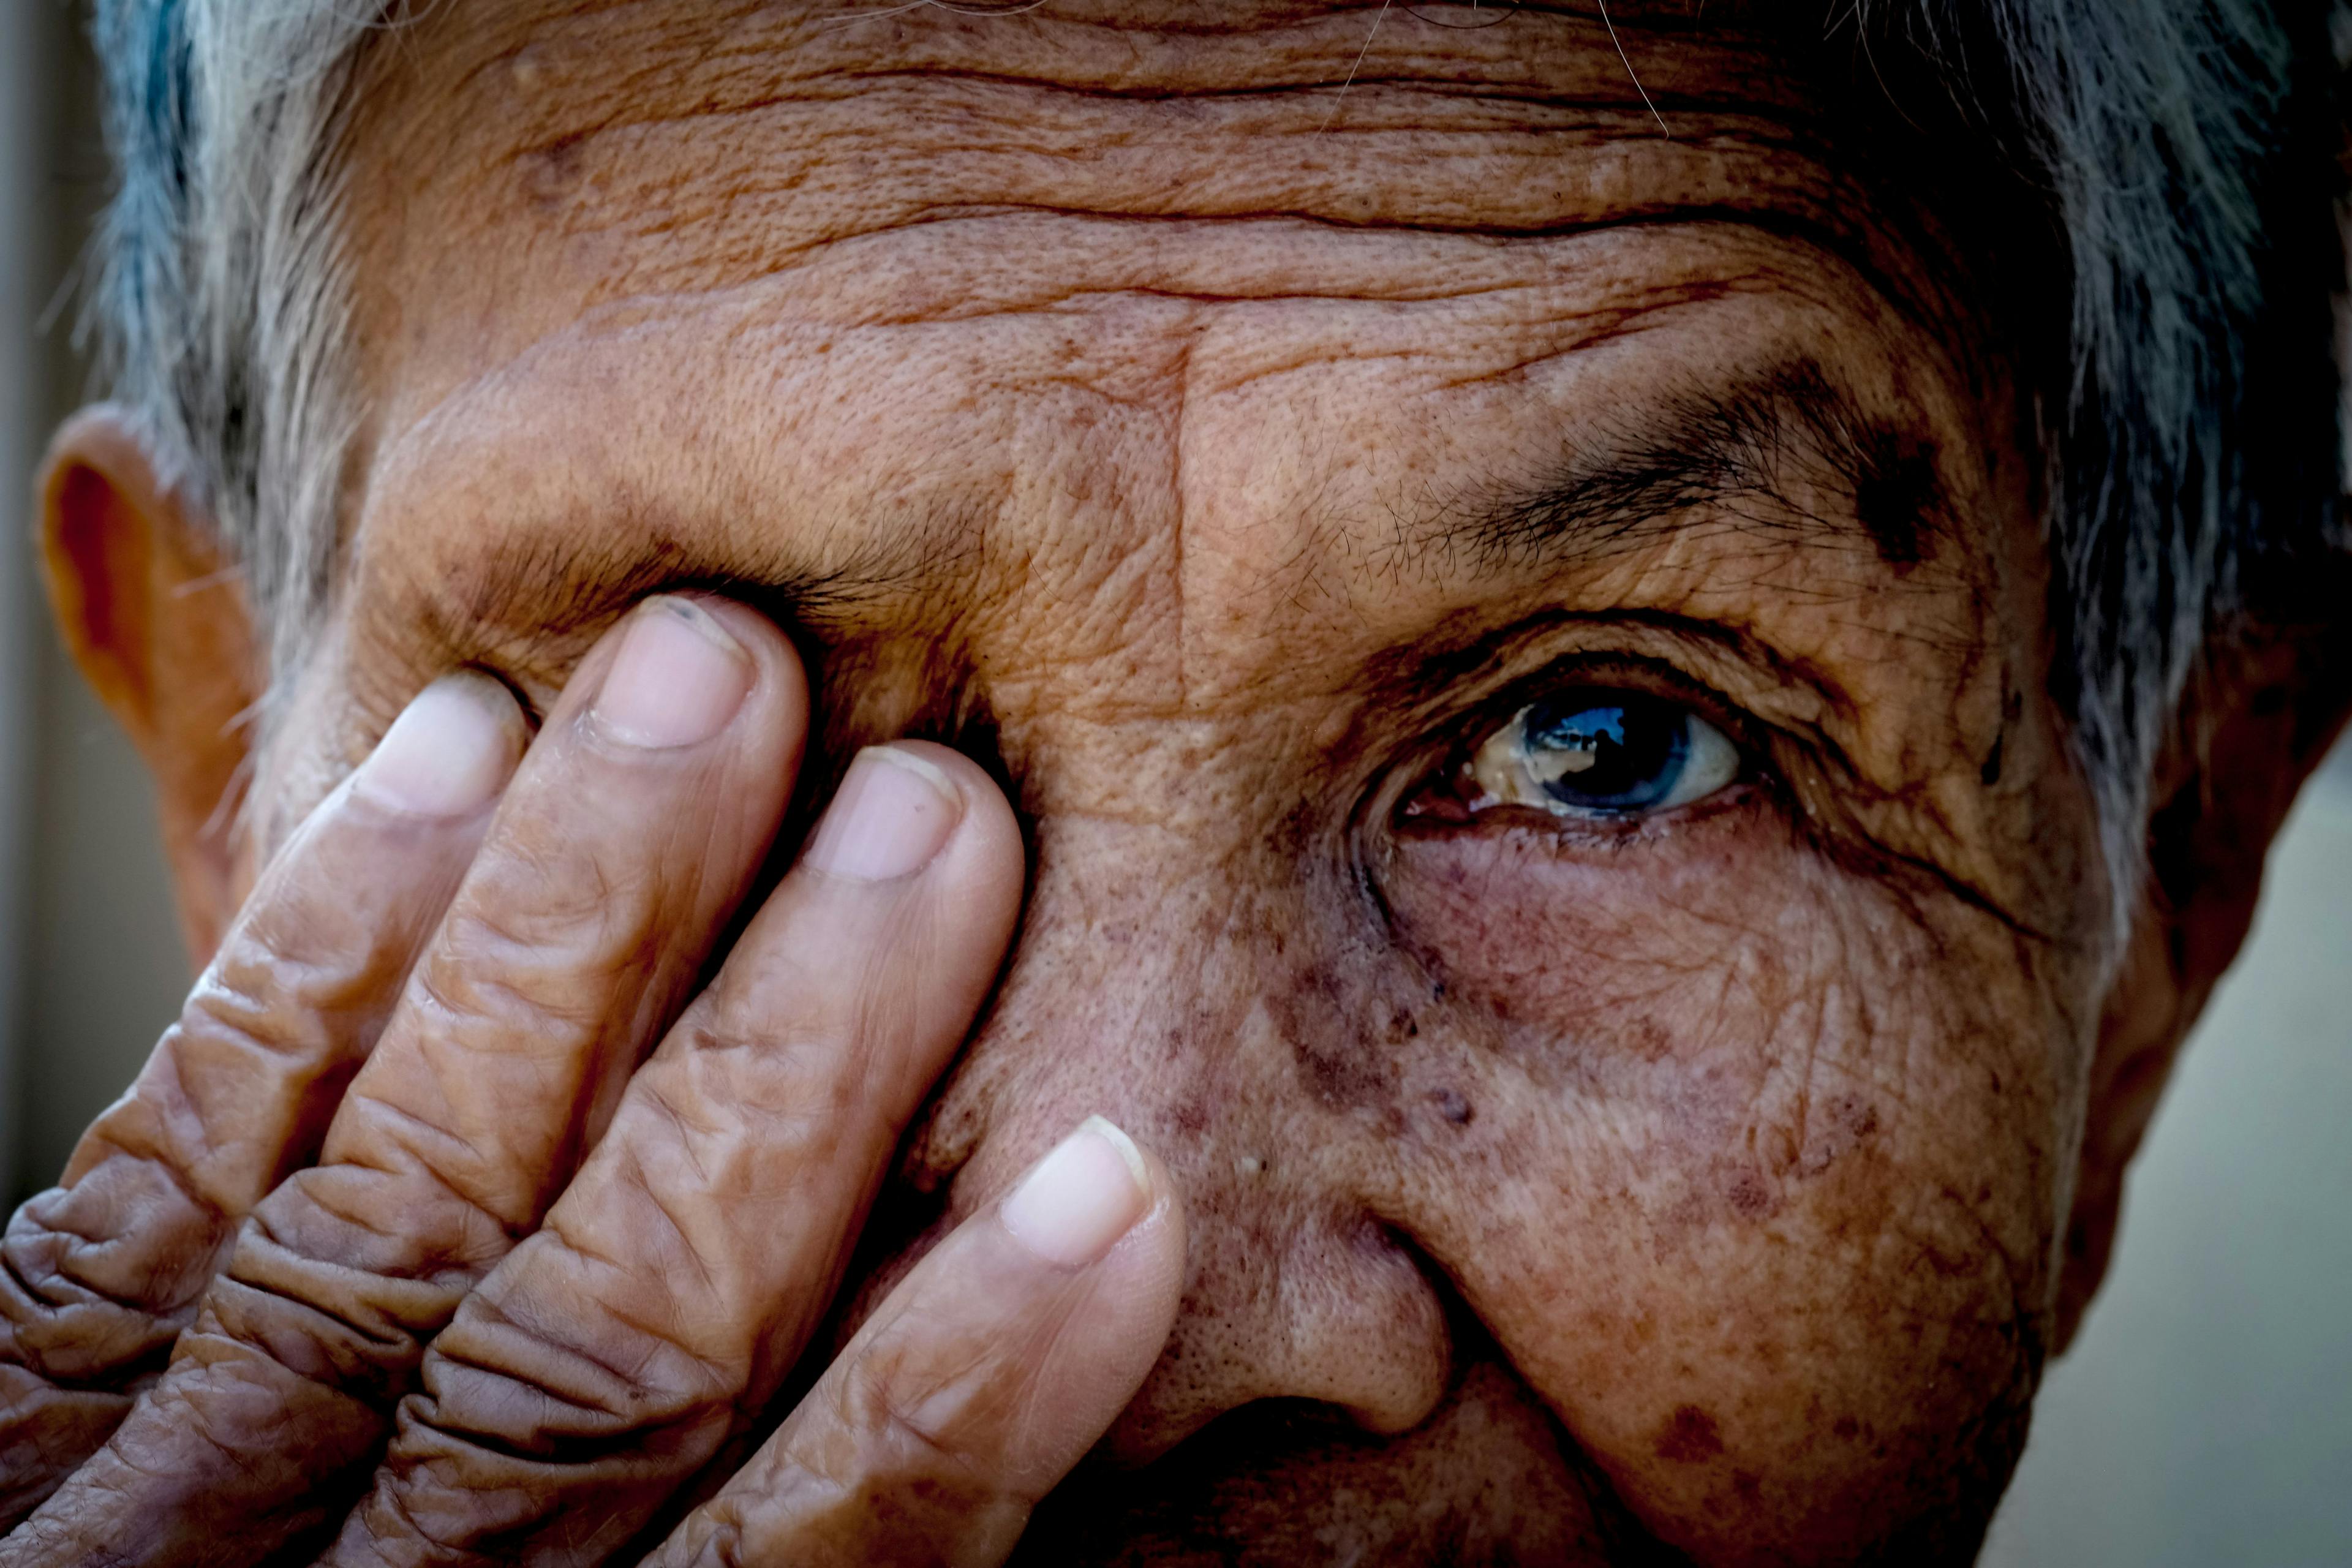 An older person covering one eye with their hand